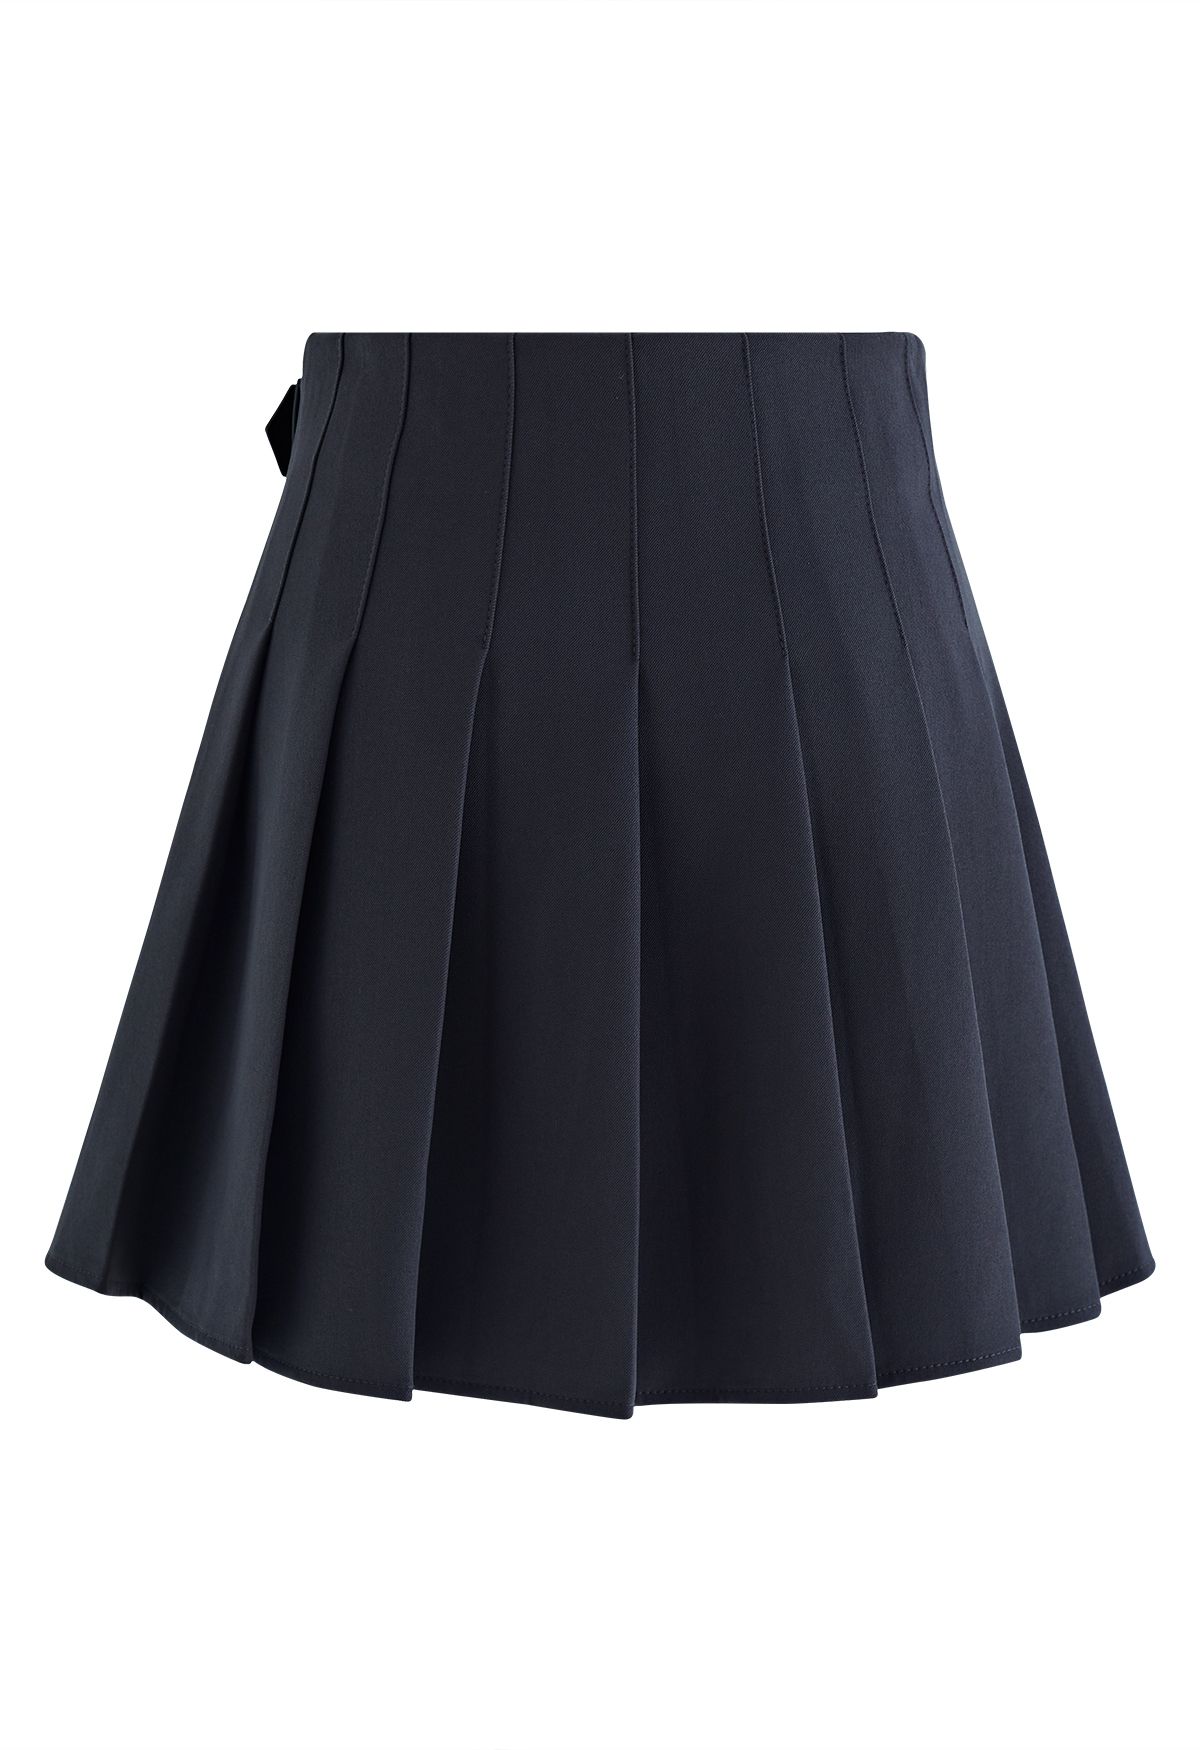 Belted Pleated Flare Mini Skirt in Smoke - Retro, Indie and Unique Fashion